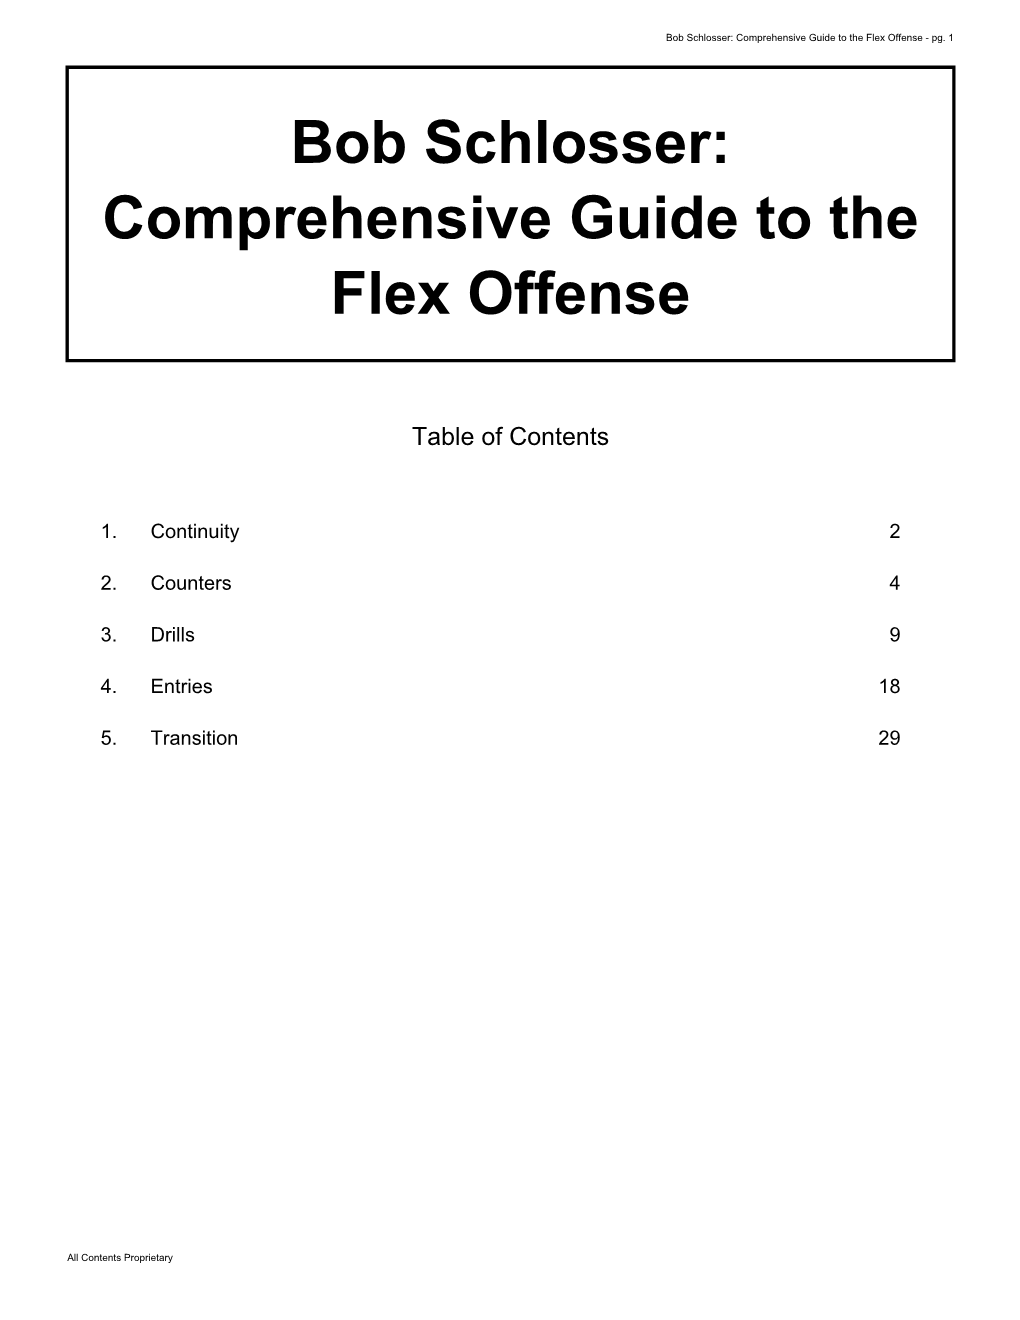 Comprehensive Guide to the Flex Offense - Pg